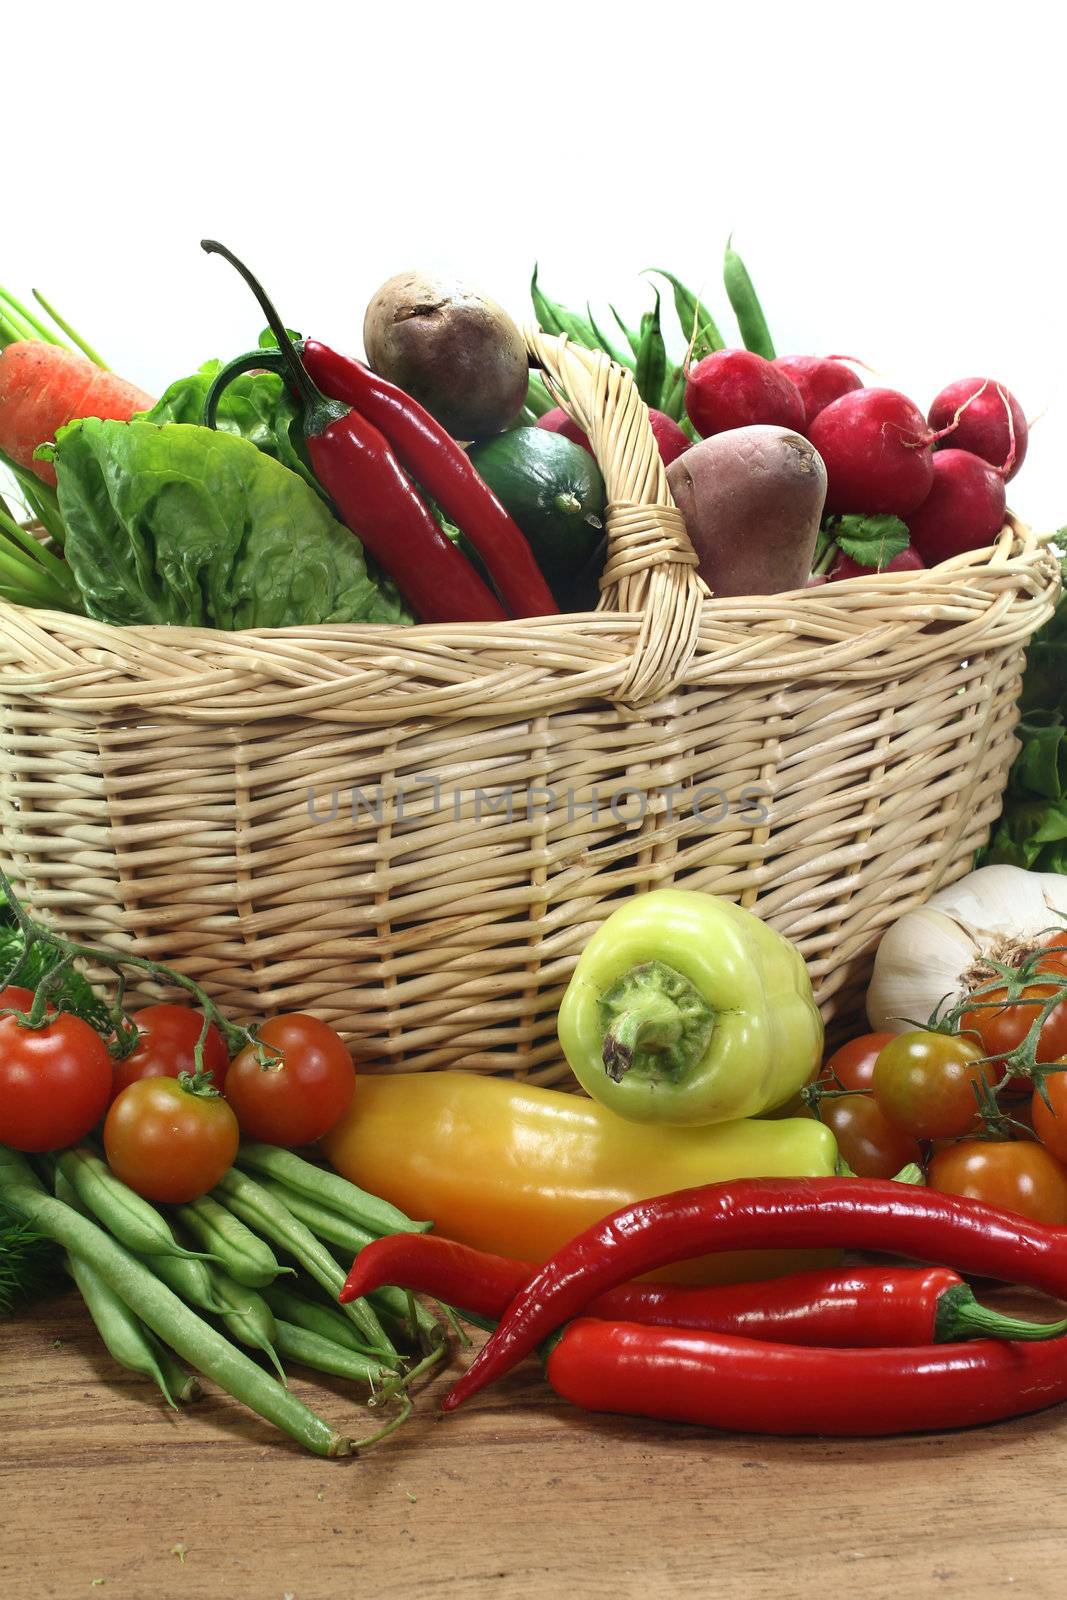 a shopping basket filled with various vegetables